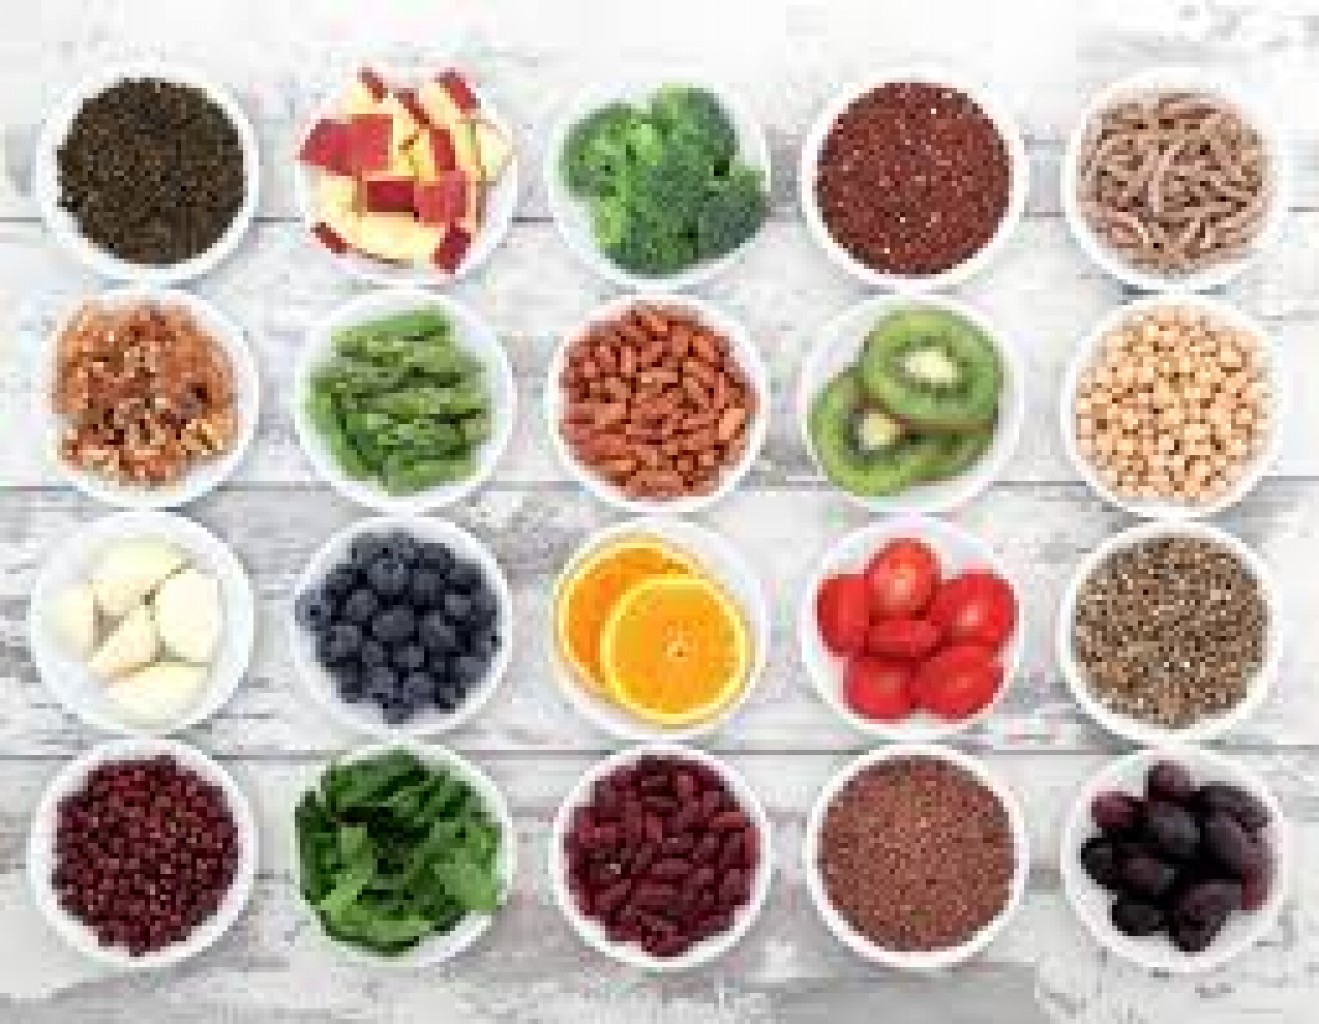 Learn about “Superfoods” in library workshop